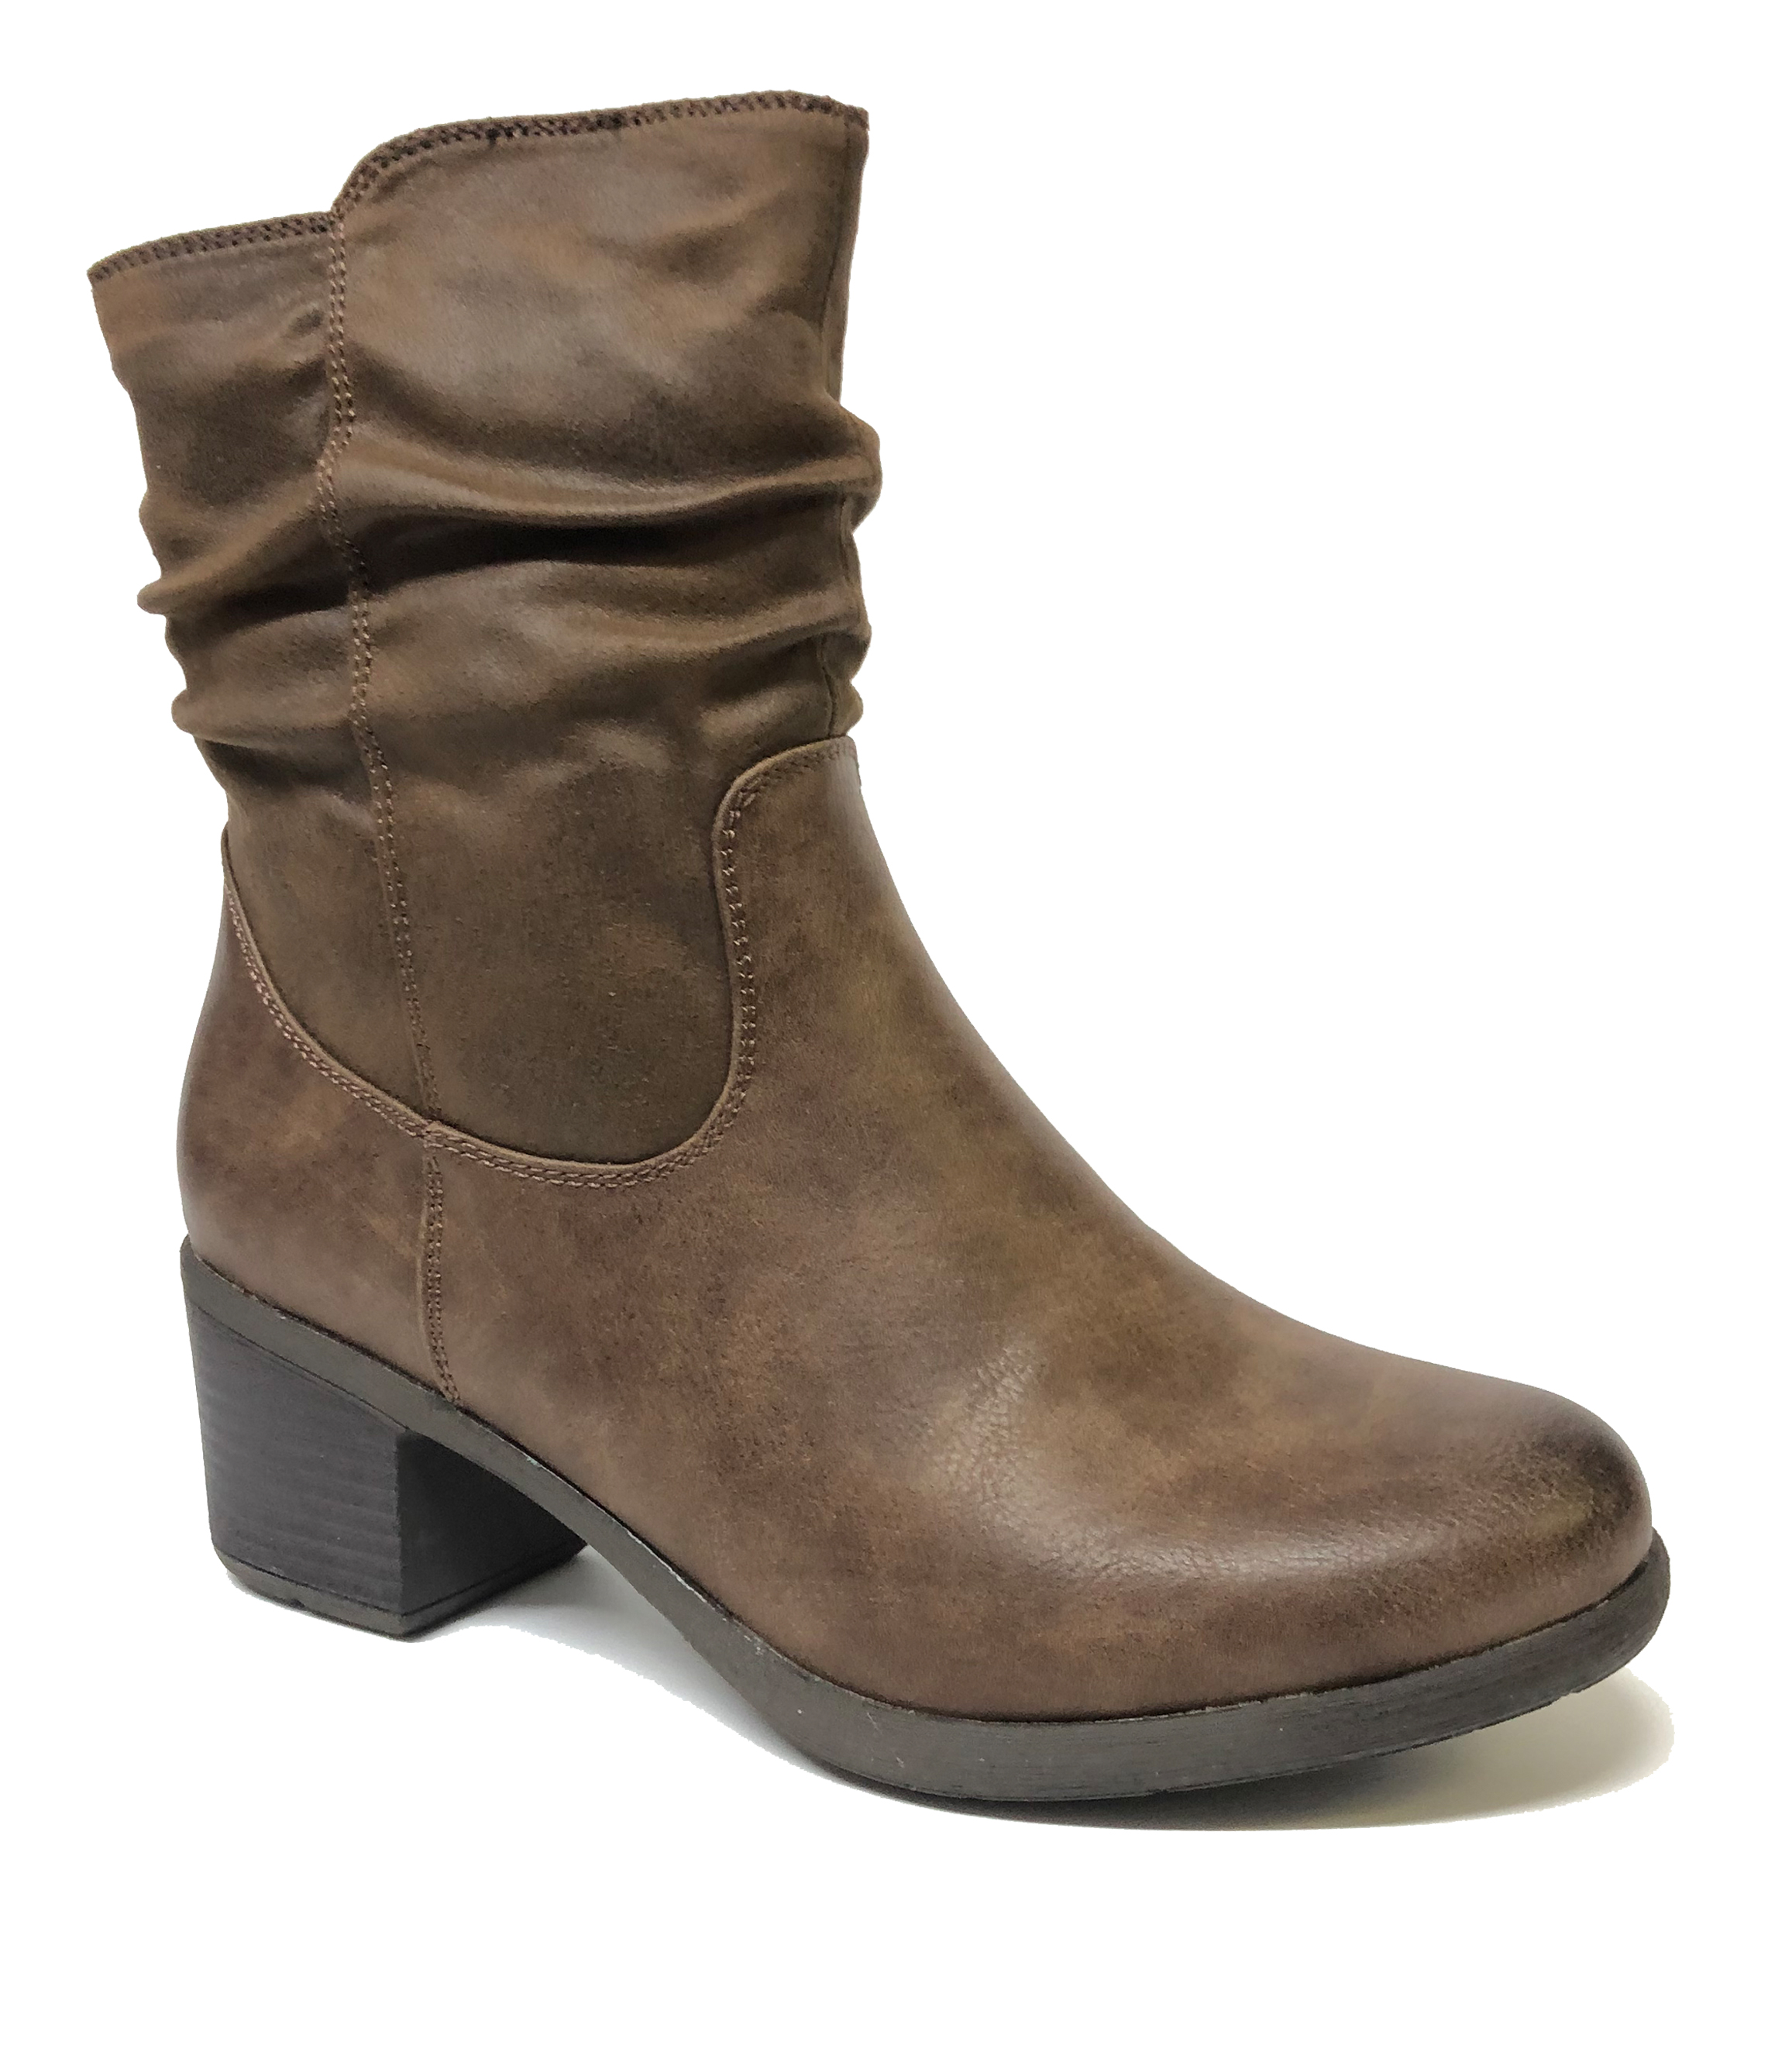 SOFT STYLE TAUPE WILLOW BOOTS | Rosella - Style inspired by elegance